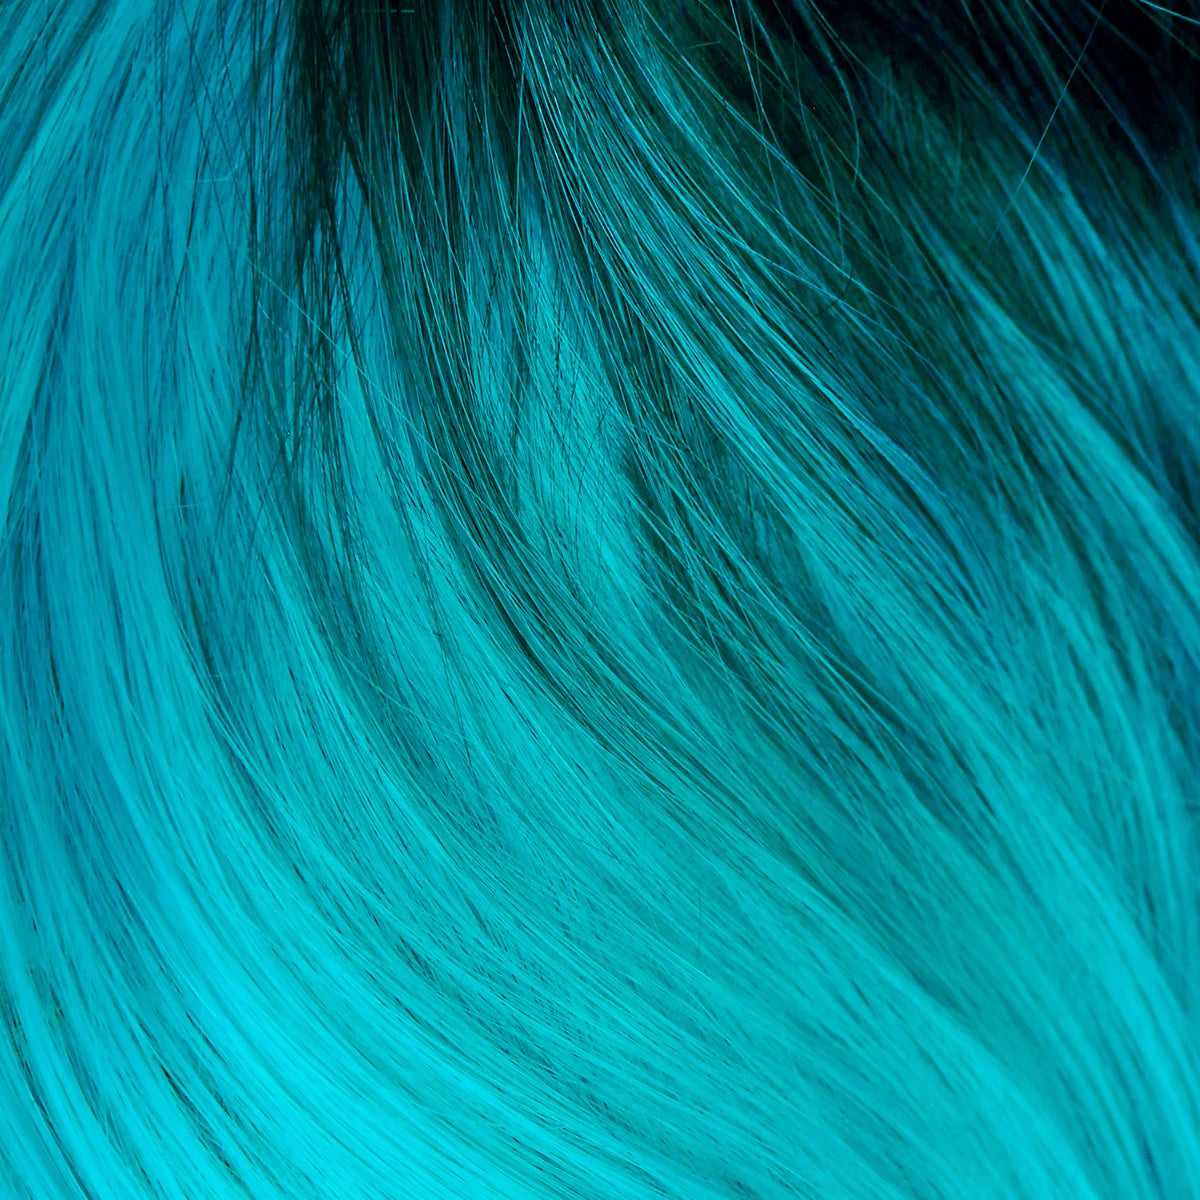 Splat Original Complete Kit with Bleach and Semi-Permanent Blue Hair Color - Tantalizing Teal